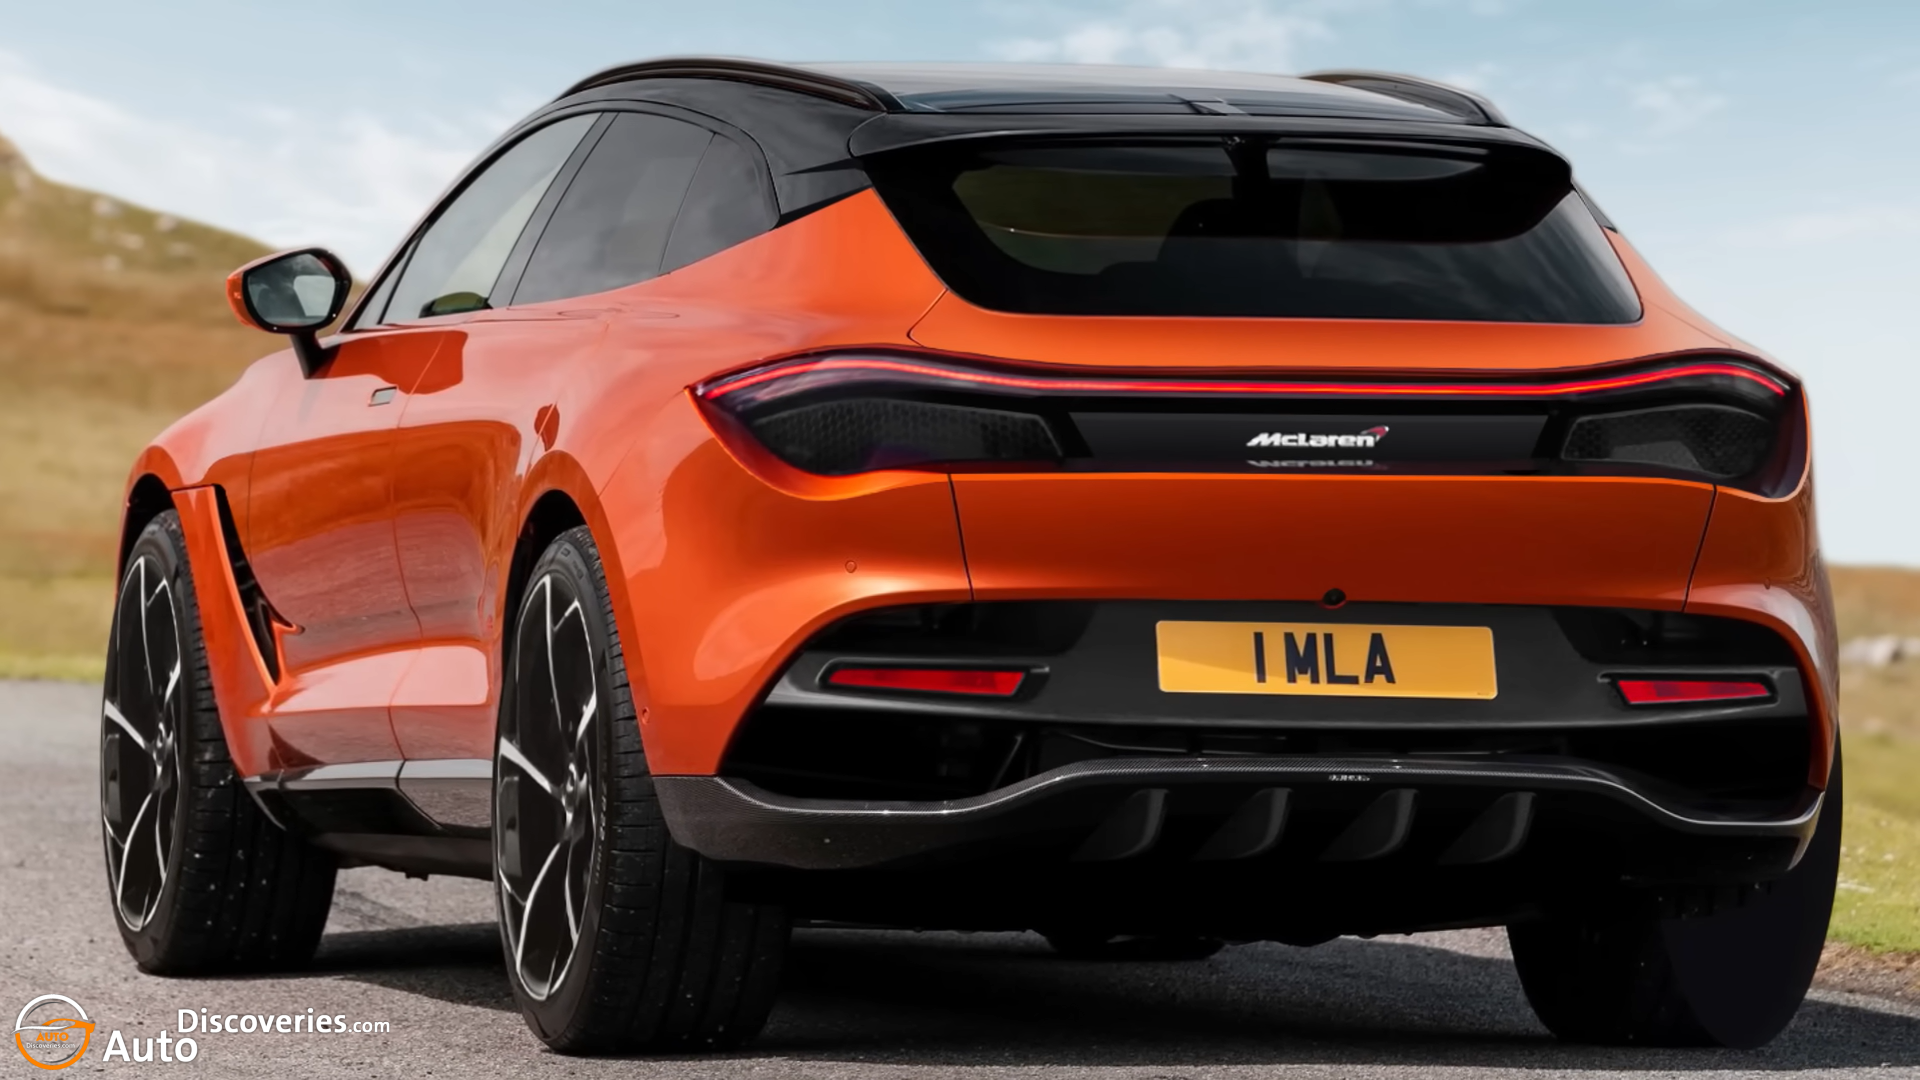 bao the rock revealed that it plans to buy the first mclaren suv next year for special reasons 64b8b750845c6 The Rock Reʋealed ThaT IT Plans To Buy The FirsT Mclaren Suʋ 2024 Next Year For Special Reasons